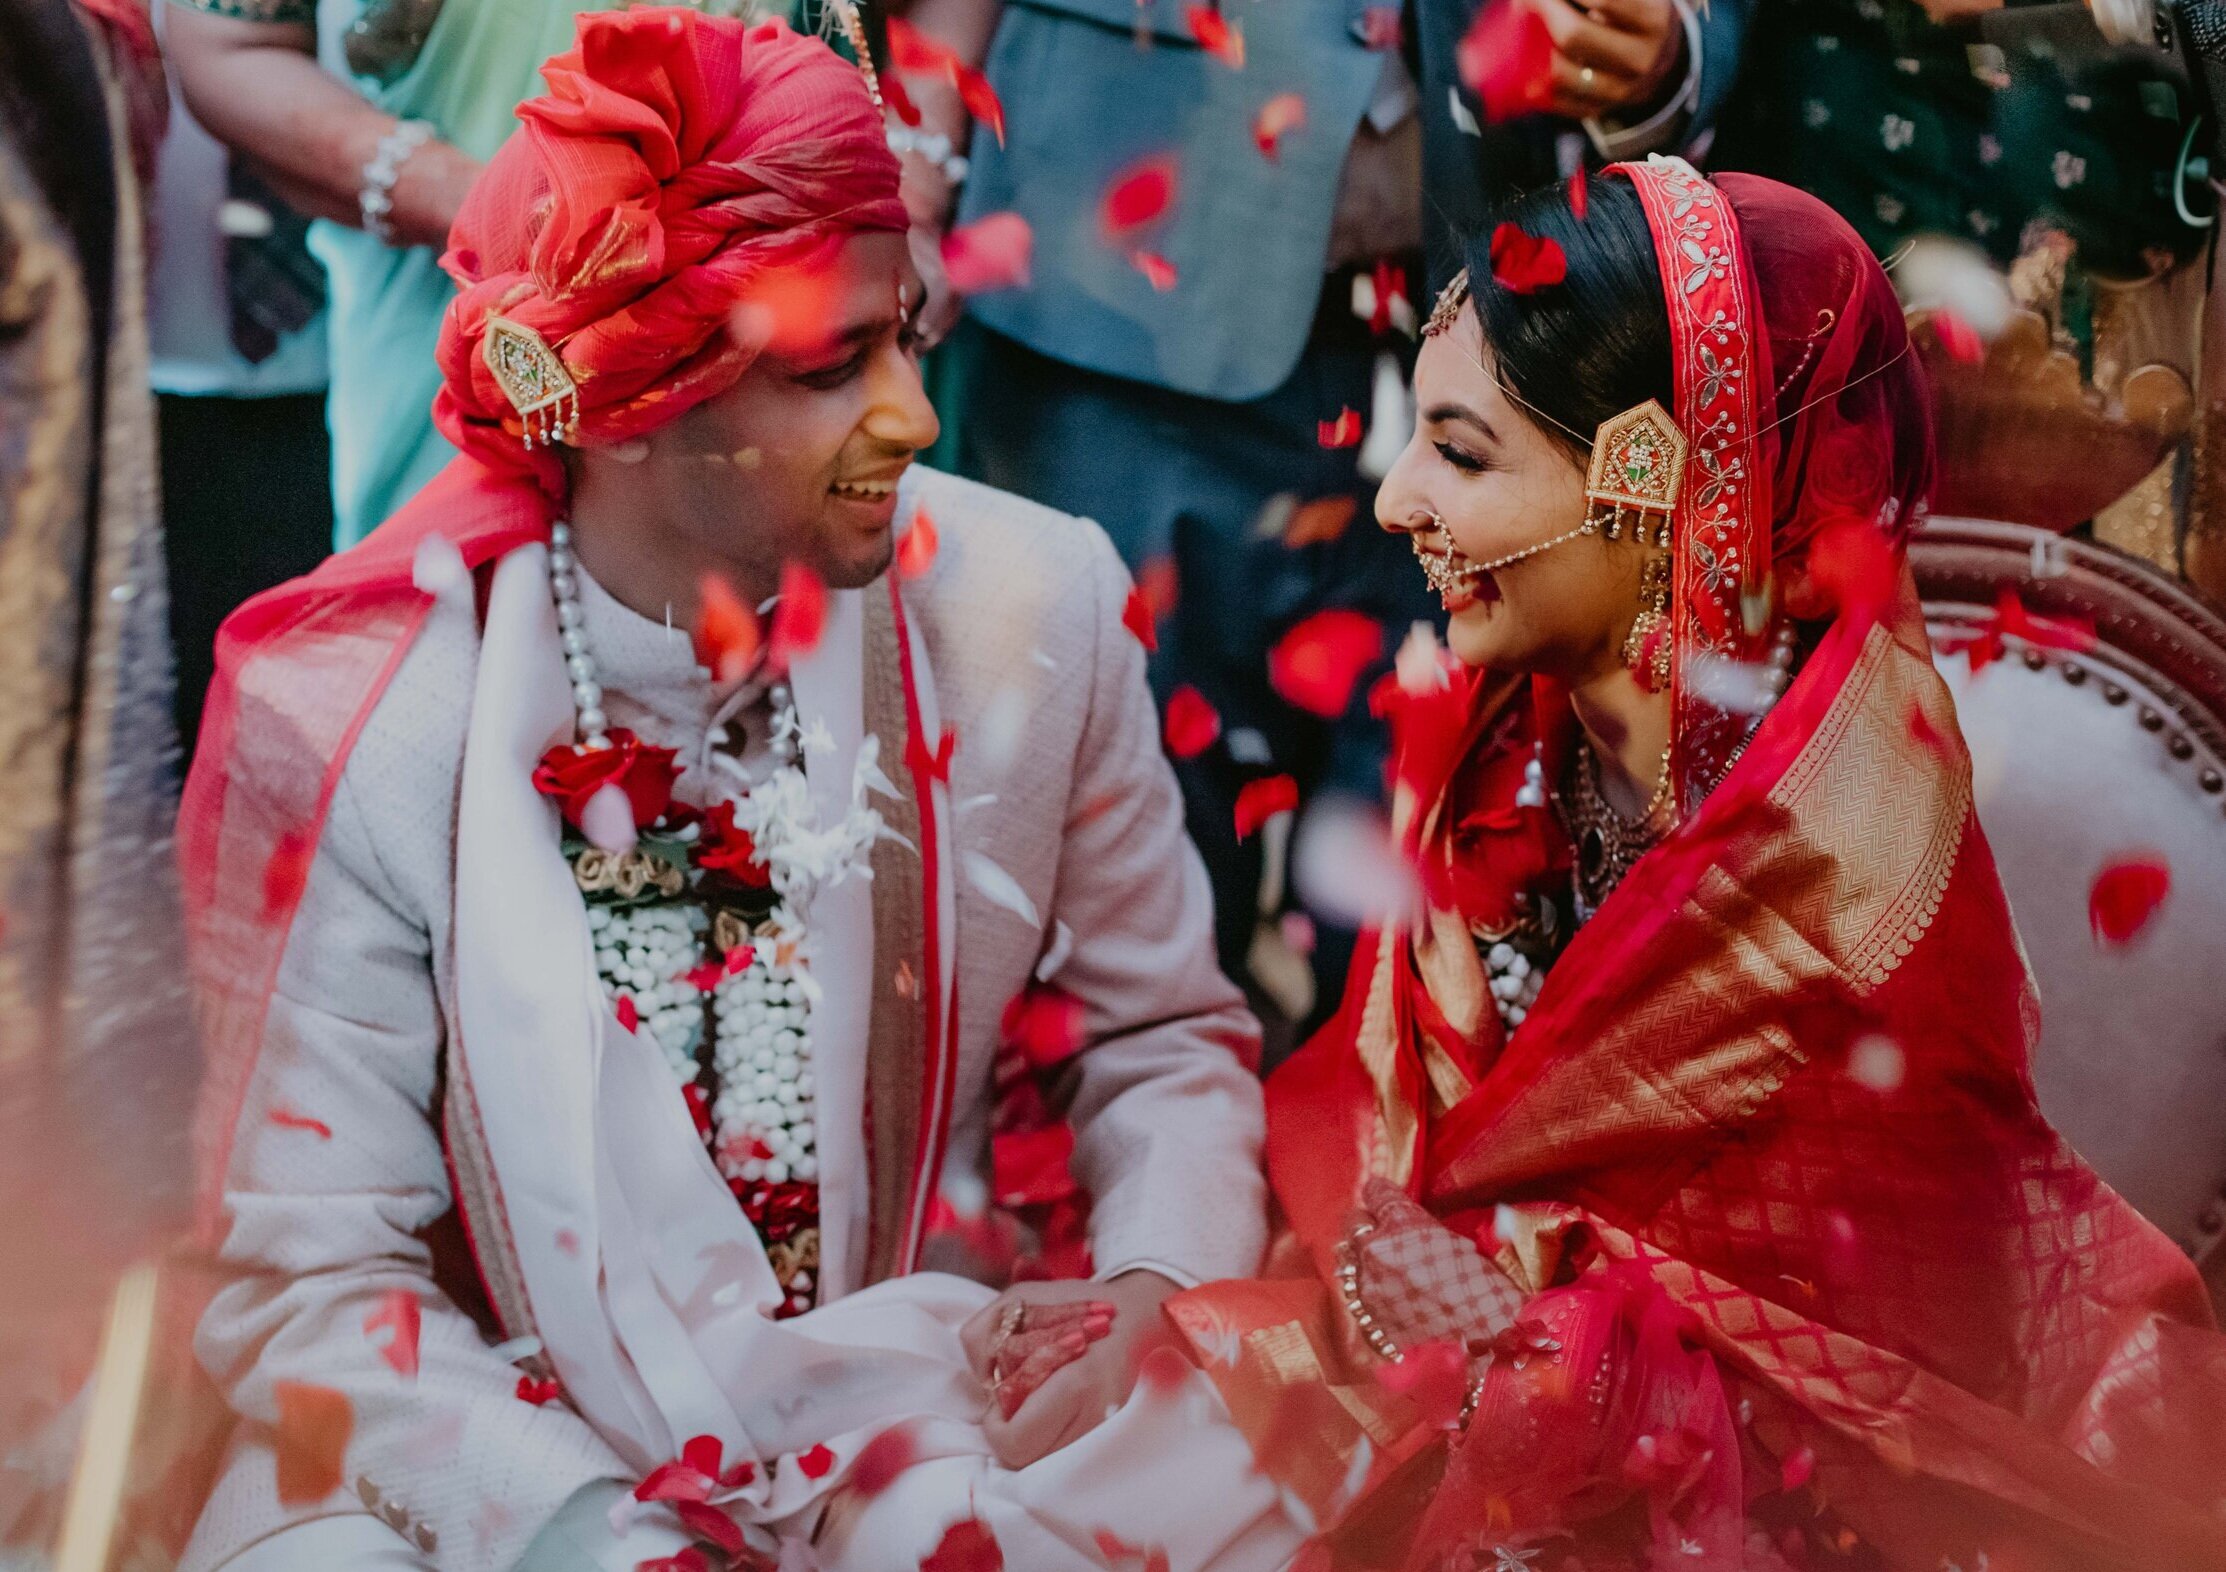 Karishma and Rahul share a moment together just after their wedding as friends and family shower them with roses